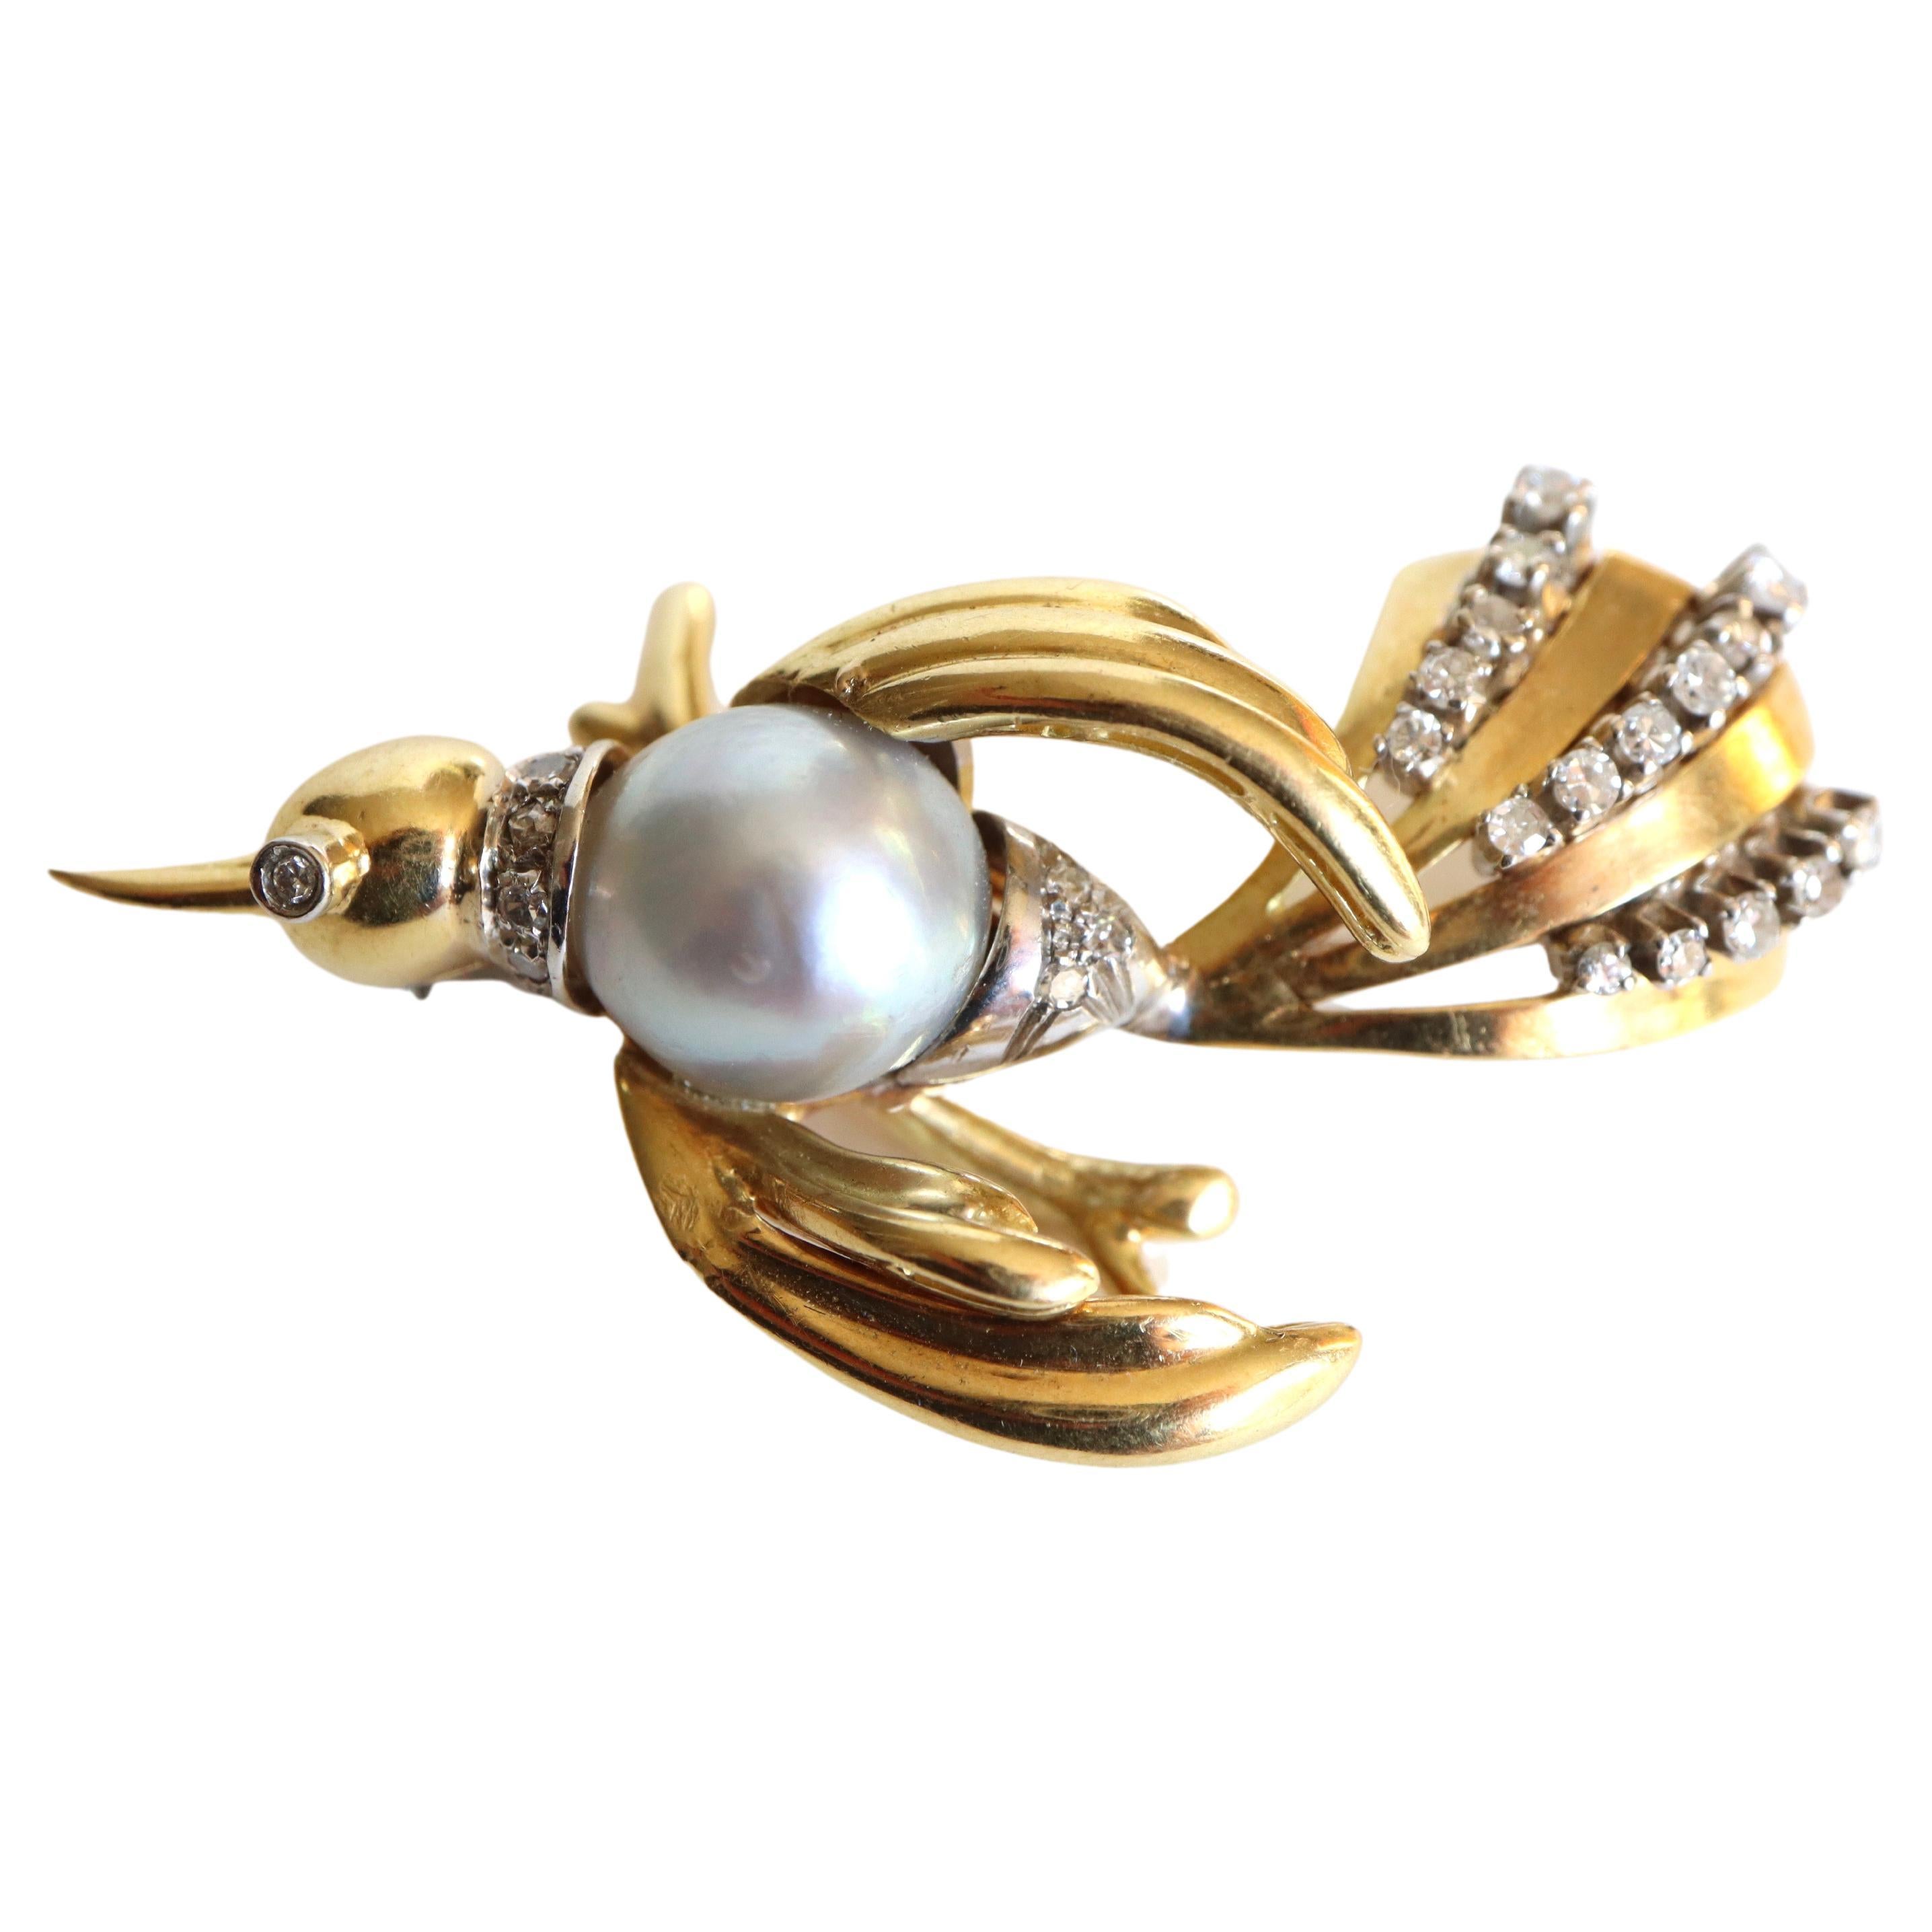 Bird Brooch circa 1960 Yellow and White Gold 18 Carat Pearl and Diamond